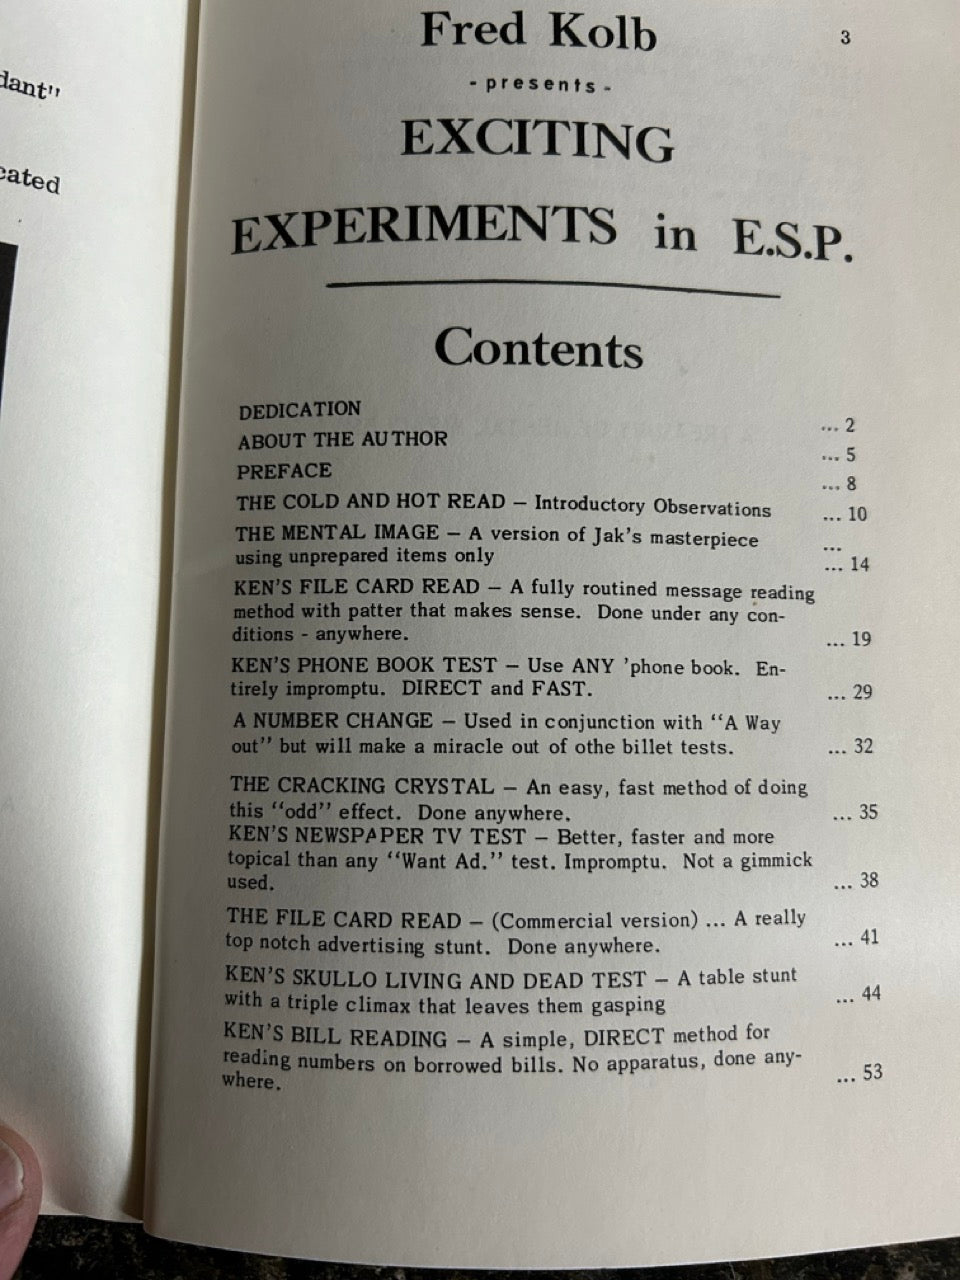 Exciting Experiments in E.S.P.- Fred Kolb